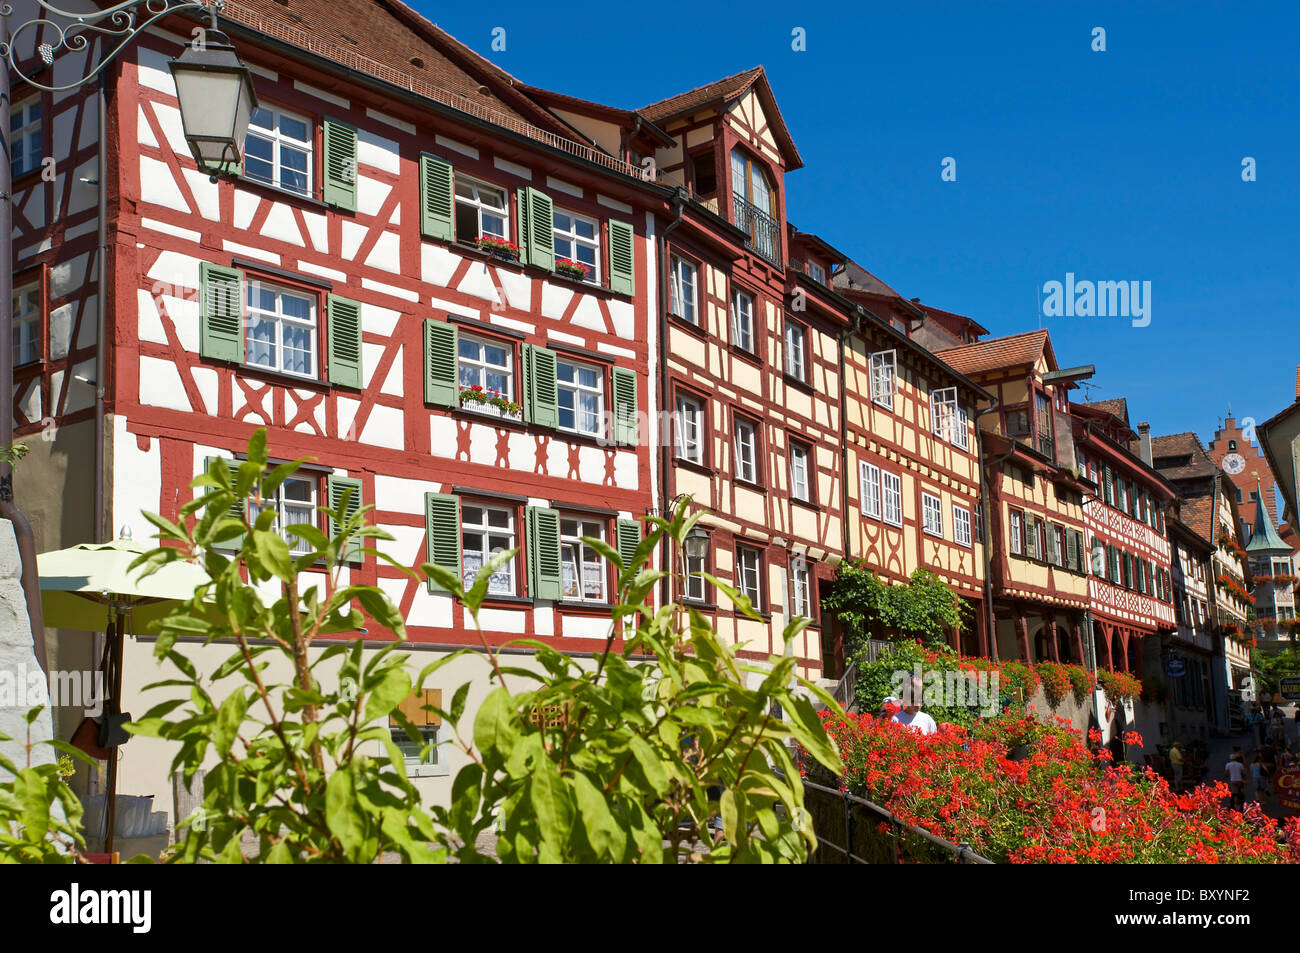 Half Timbered House in Meersburg, Lake Constance, Baden-Wuerttemberg, Germany Stock Photo